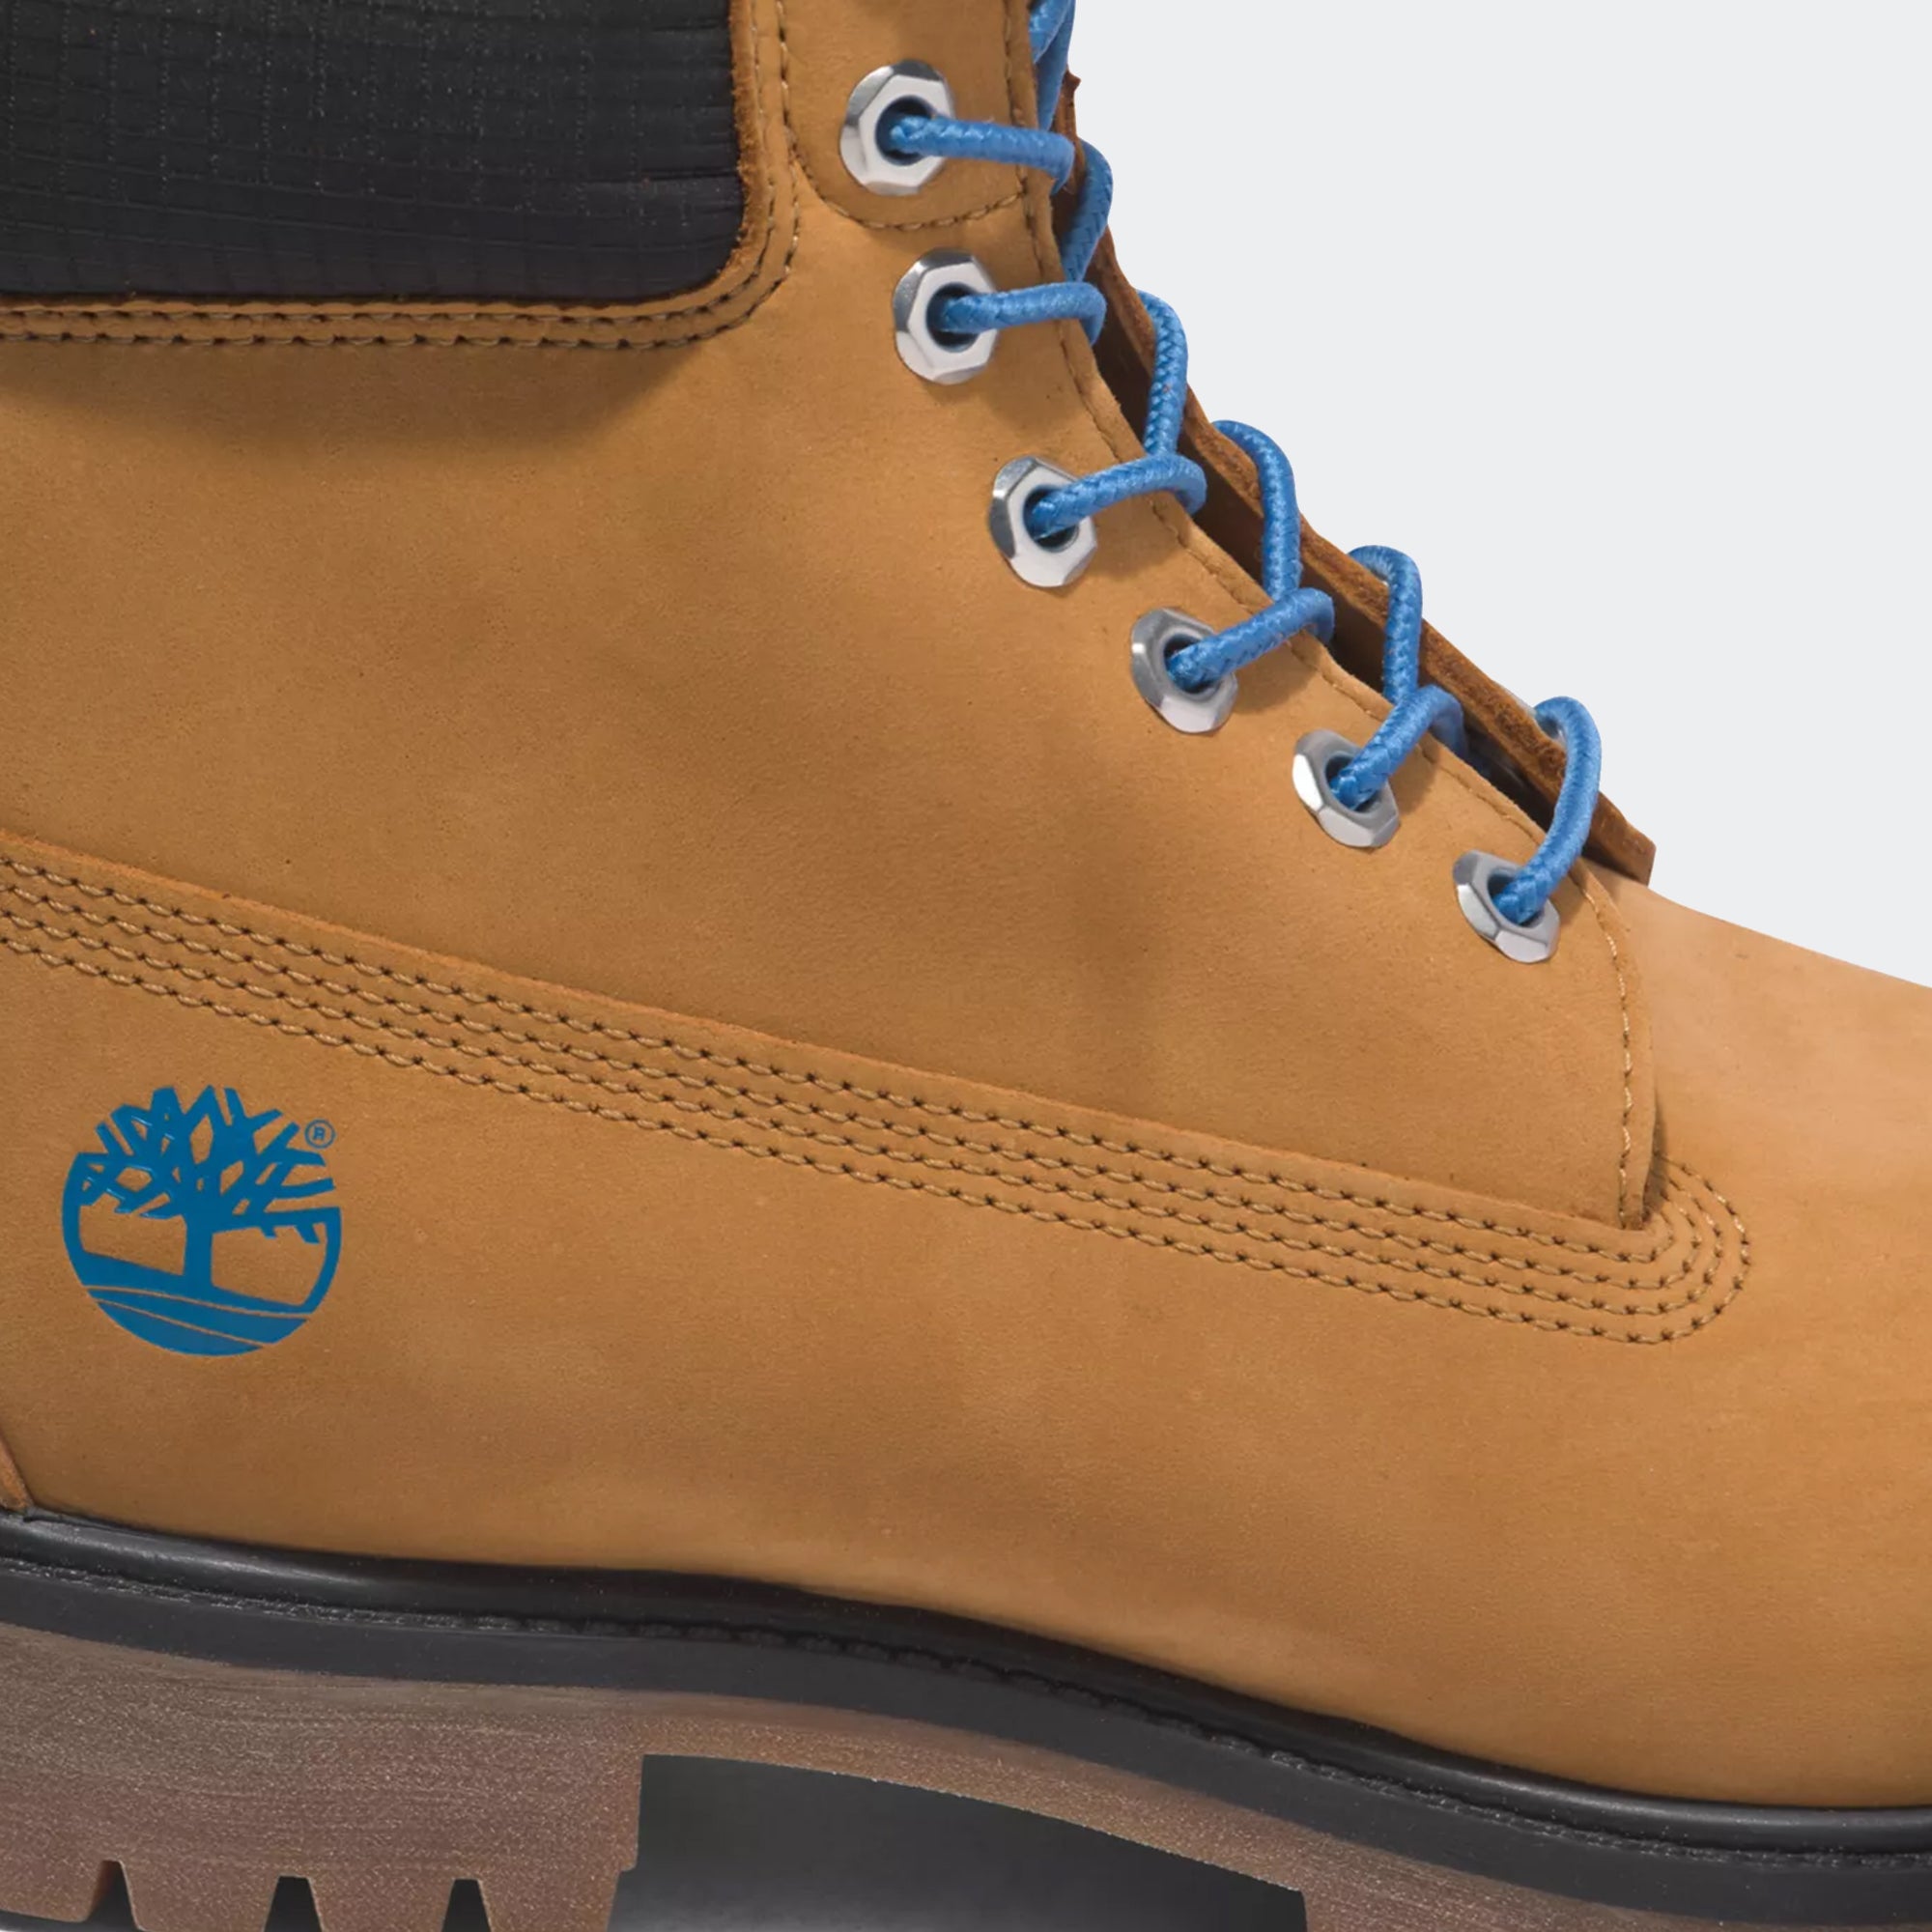 Timberland Men's 6 inch Lace Up Waterproof Boot